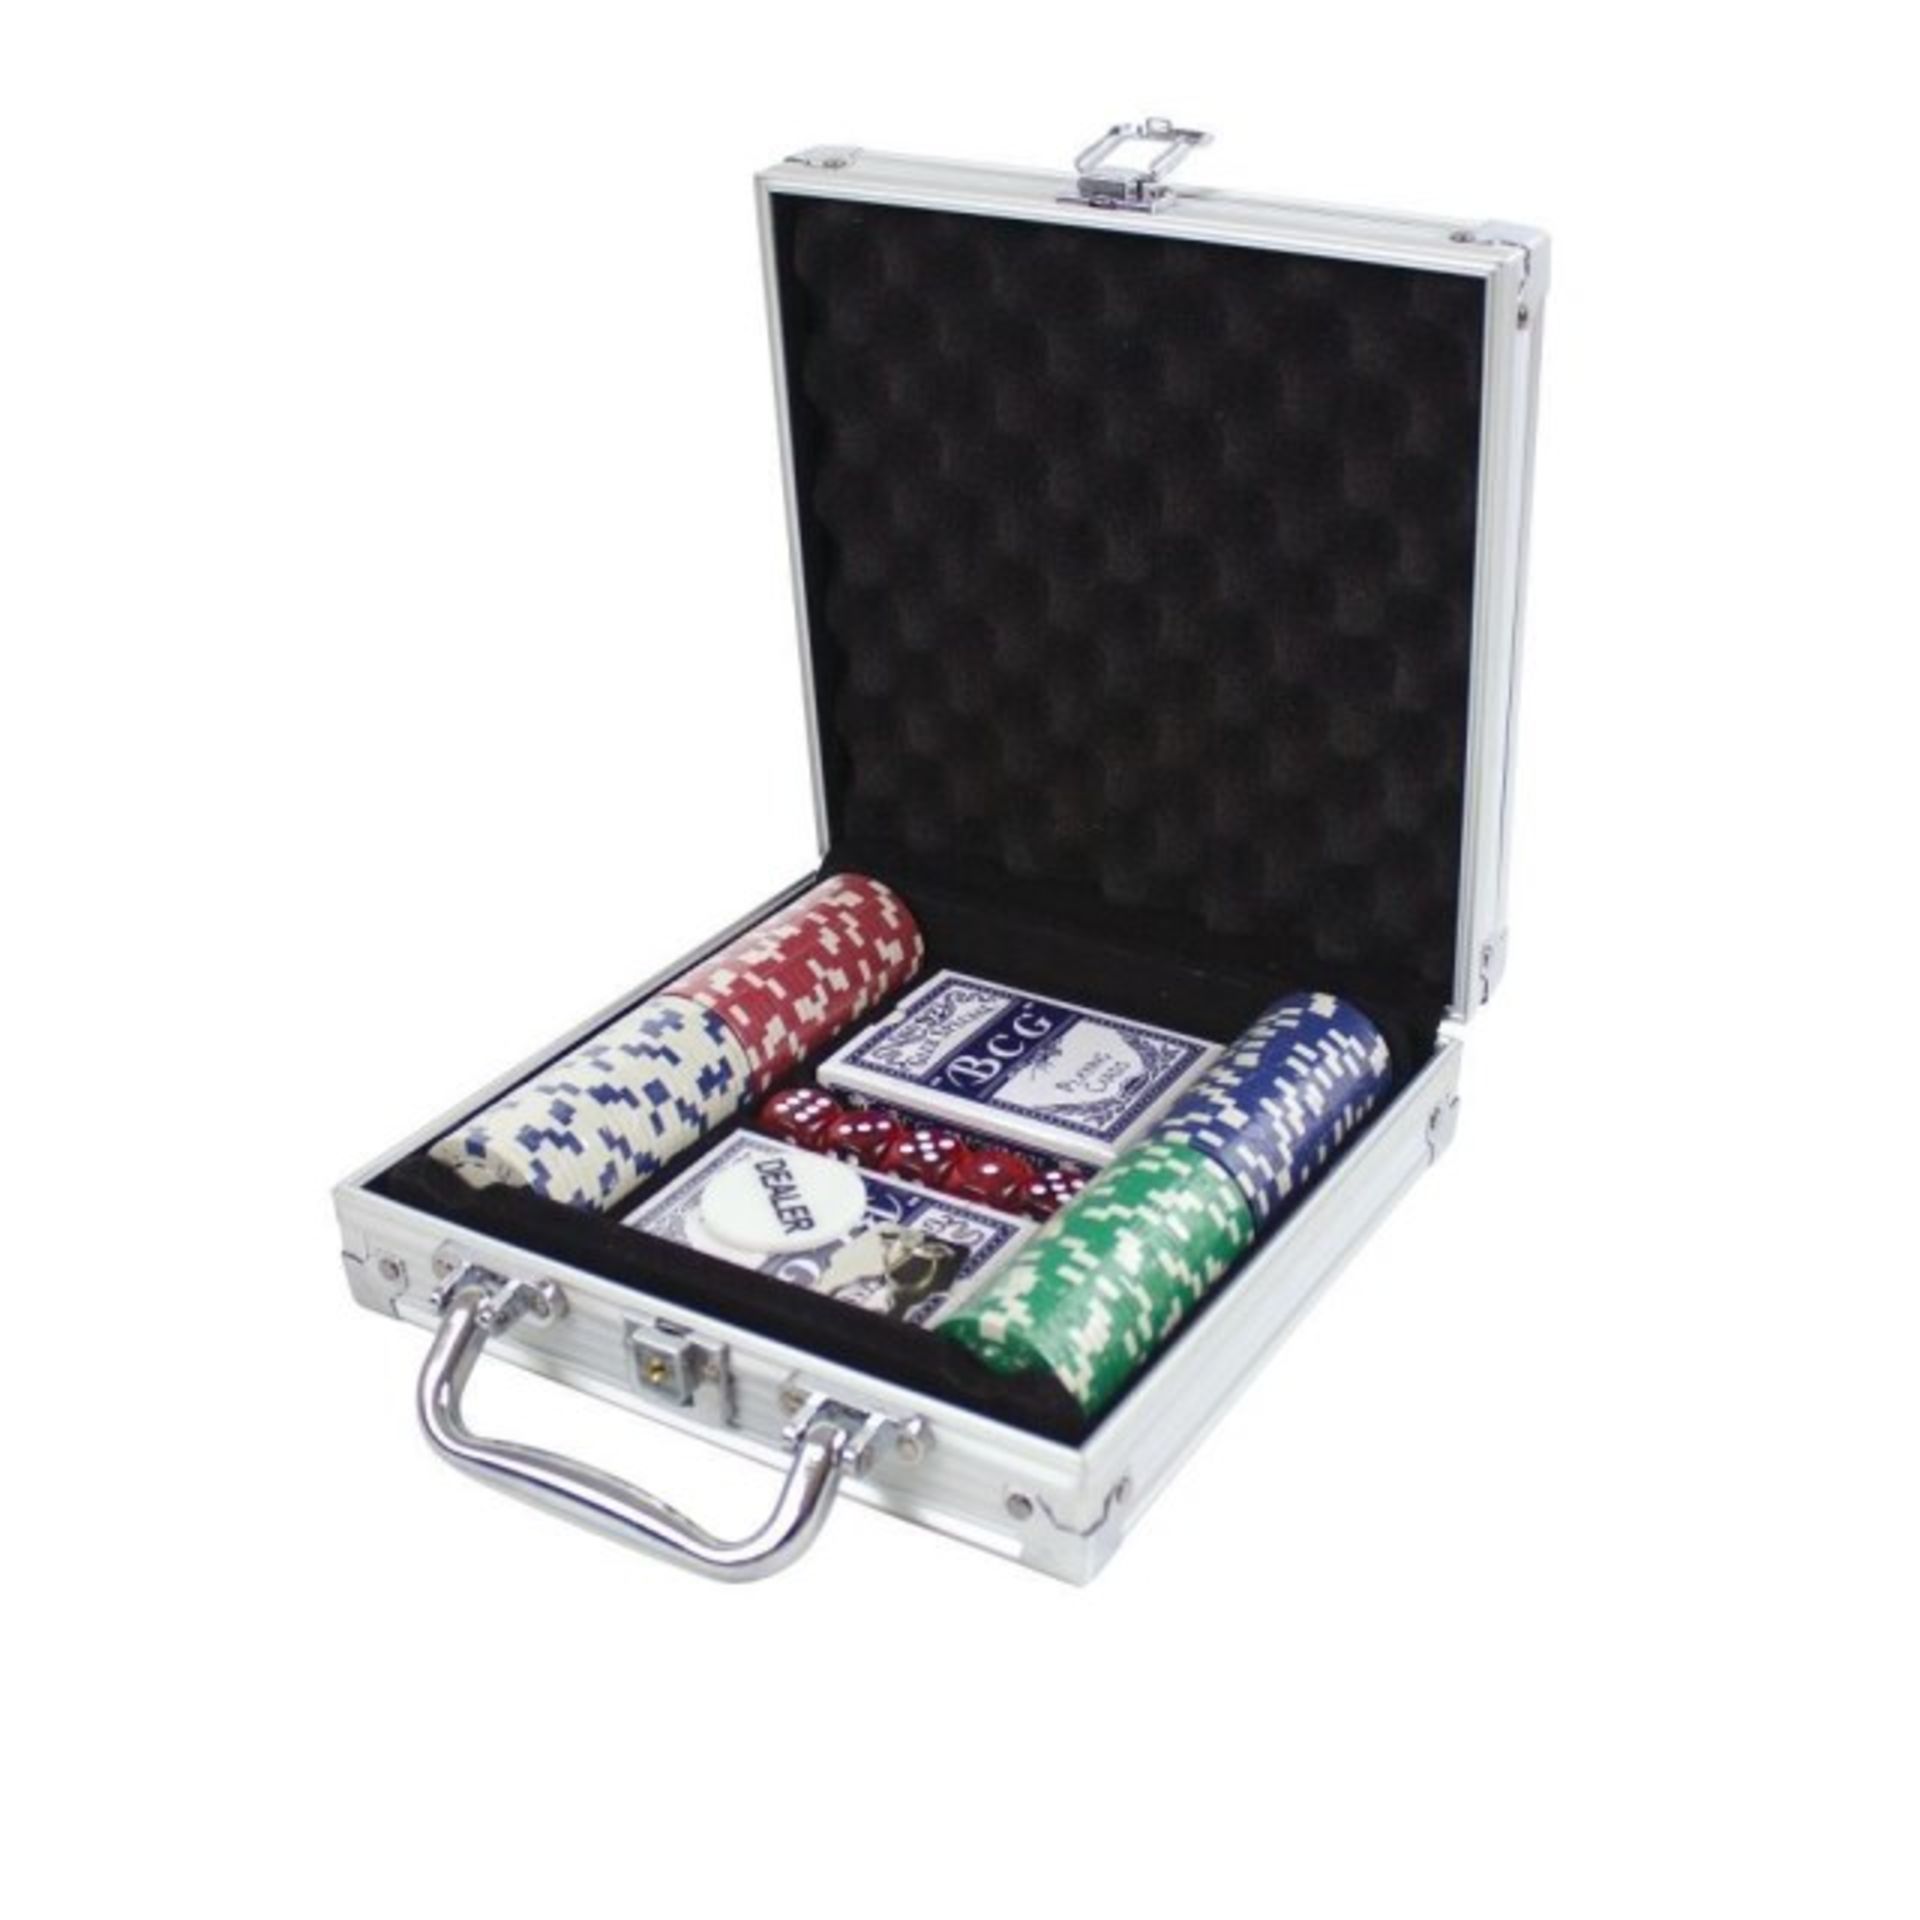 V *TRADE QTY* Brand New 100 Piece Casino Style Poker Set In Carry Case X 4 YOUR BID PRICE TO BE